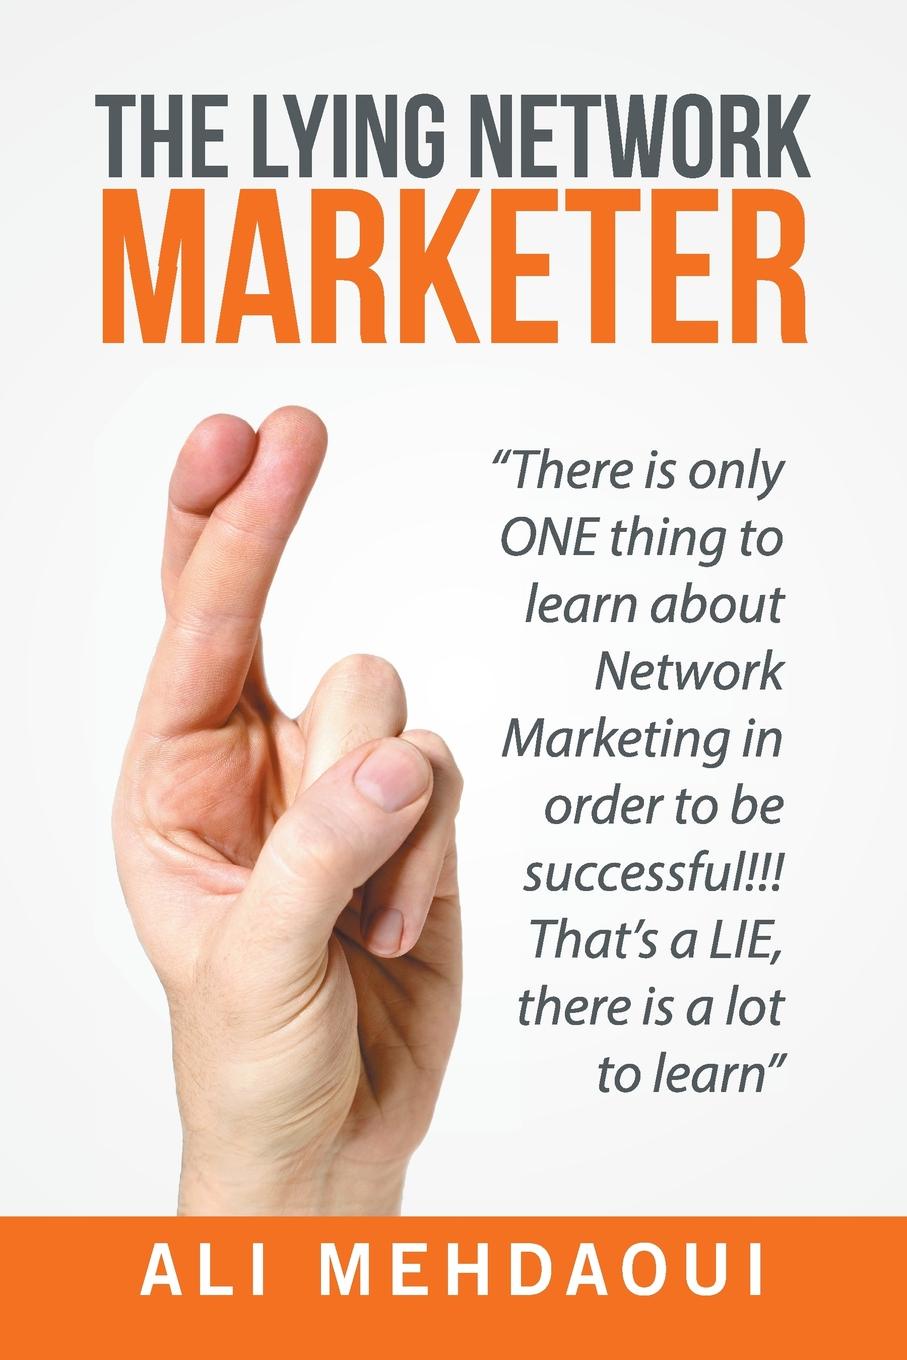 The Lying Network Marketer. There Is Only One Thing to Learn About Network Marketing in Order to Be Successful!!! That`s a Lie, There Is a Lot to Learn